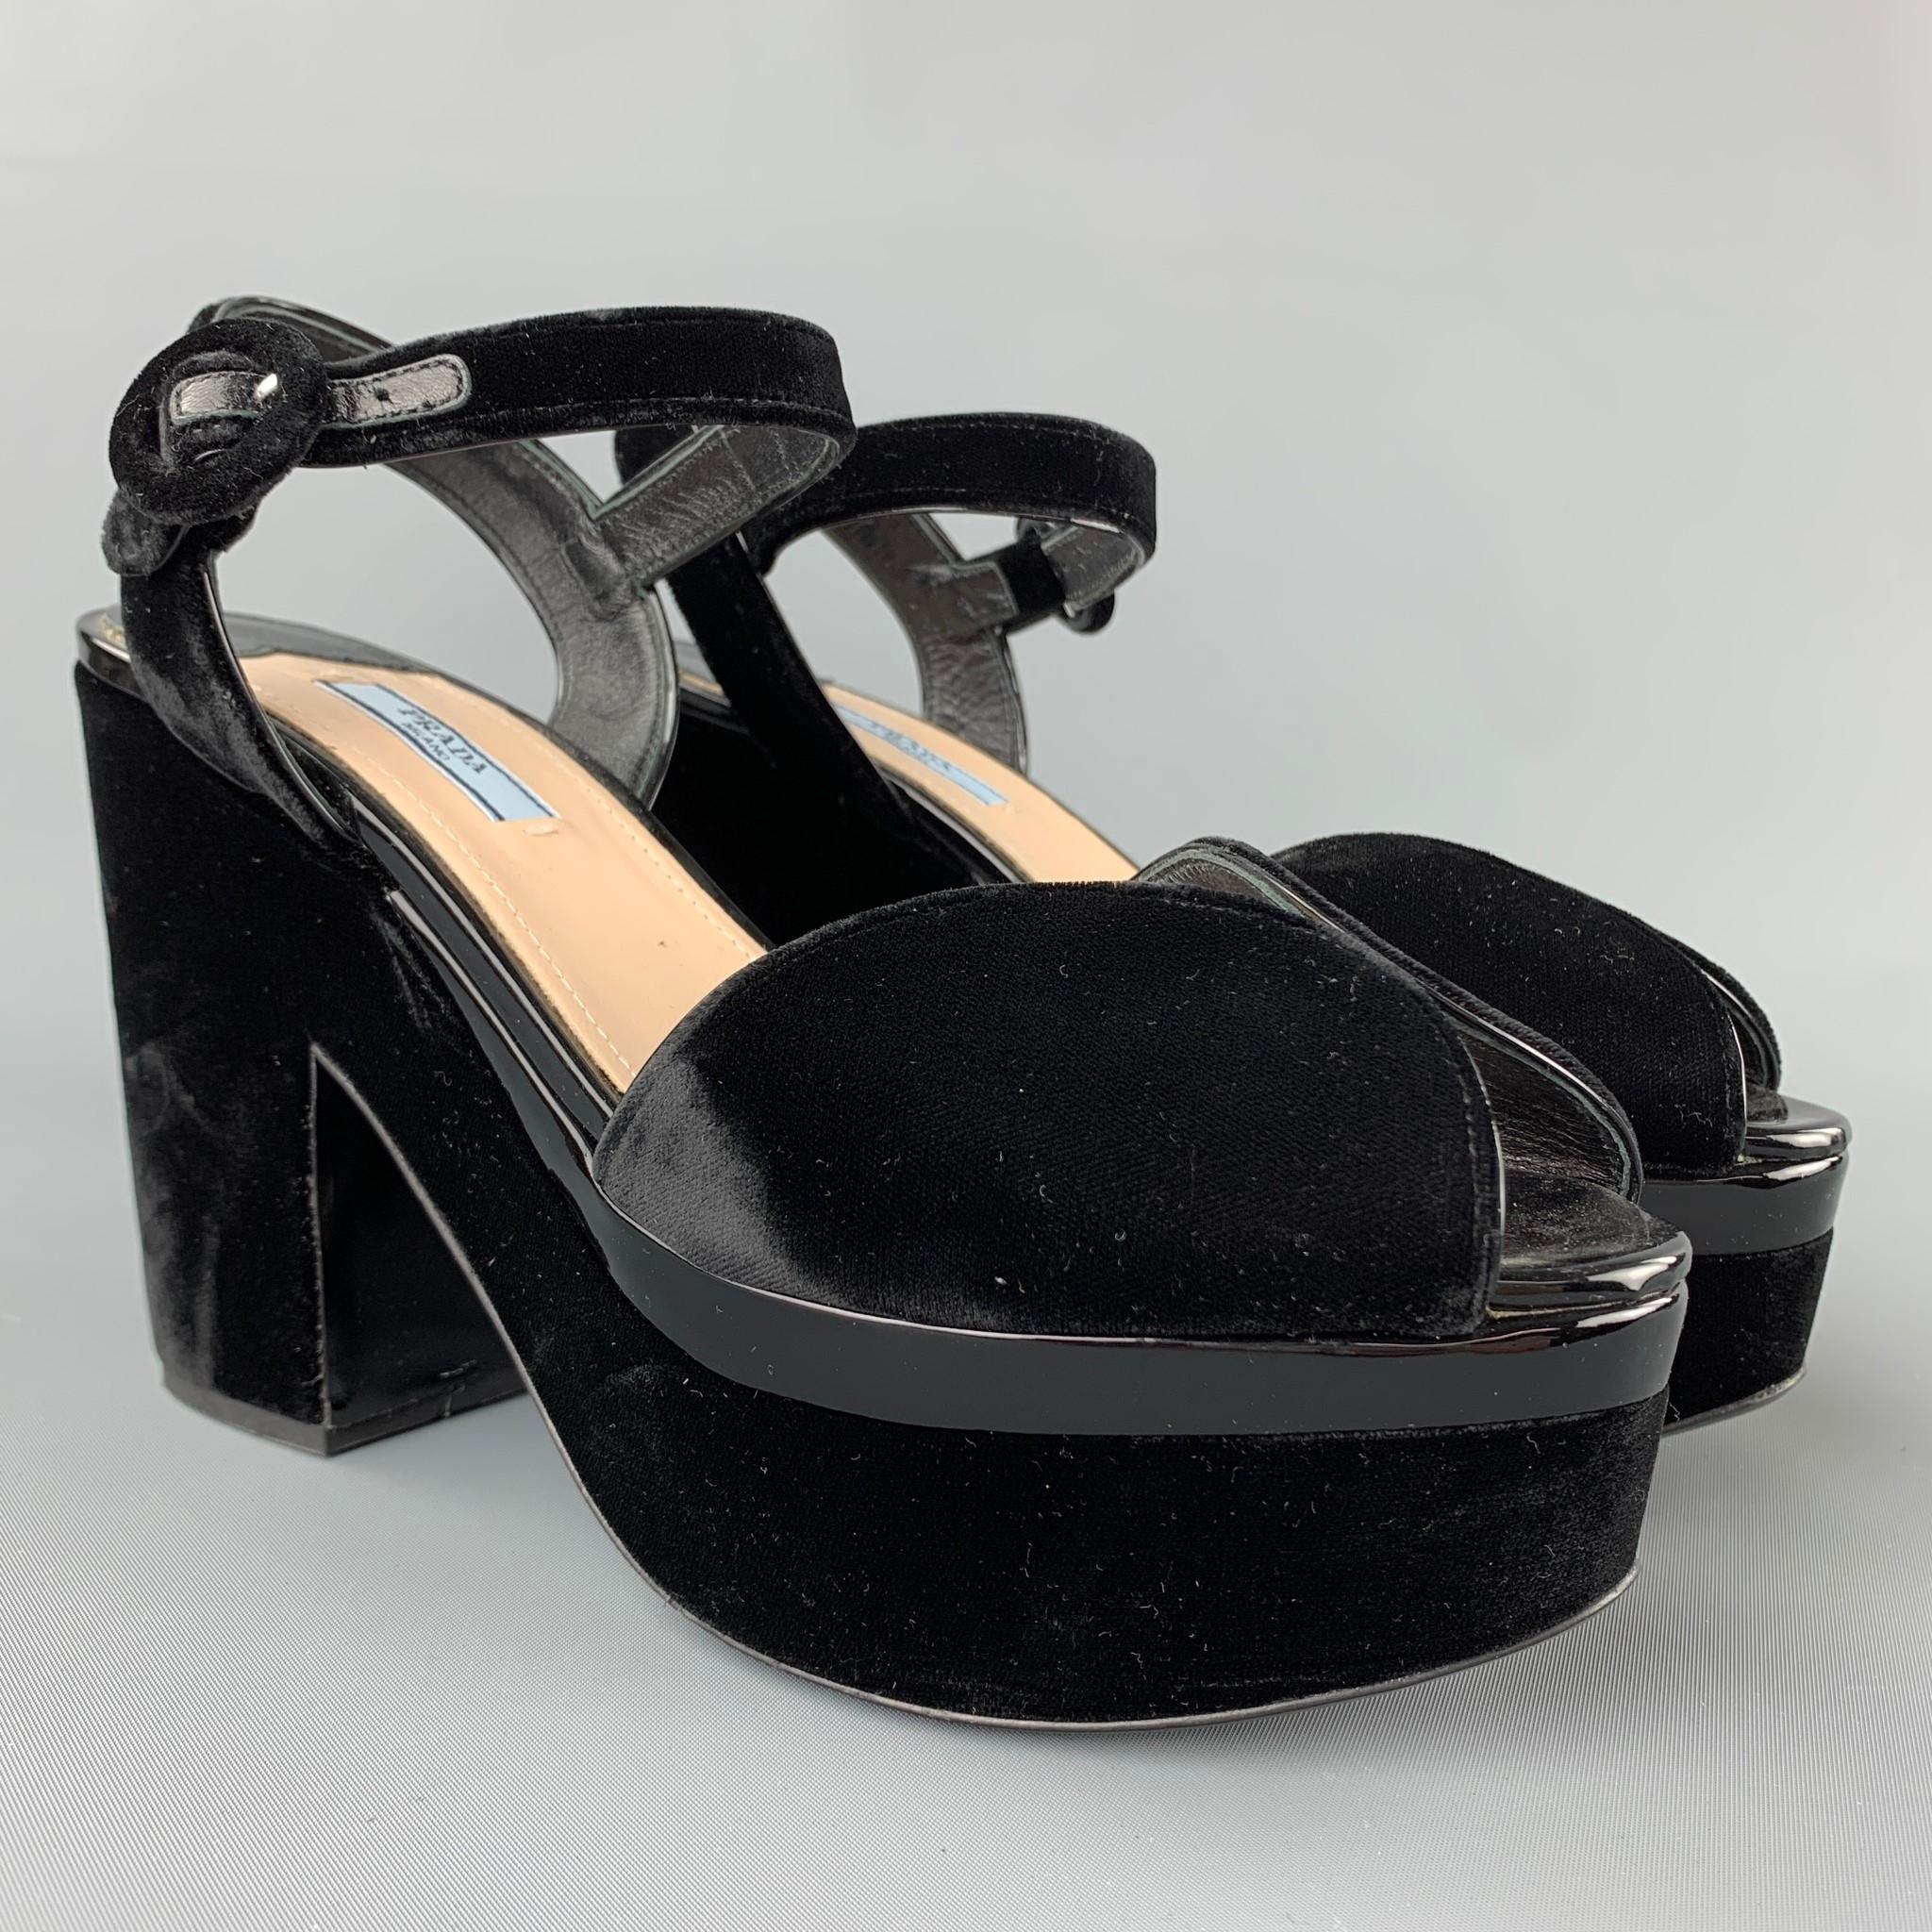 PRADA sandals comes in a black velvet with a patent leather trim featuring a peep toe, platform, and a ankle strap closure. Made in Italy. 

Very Good Pre-Owned Condition.
Marked: EU 40
Original Retail Price: $825.00

Measurements:

Heel: 4.5